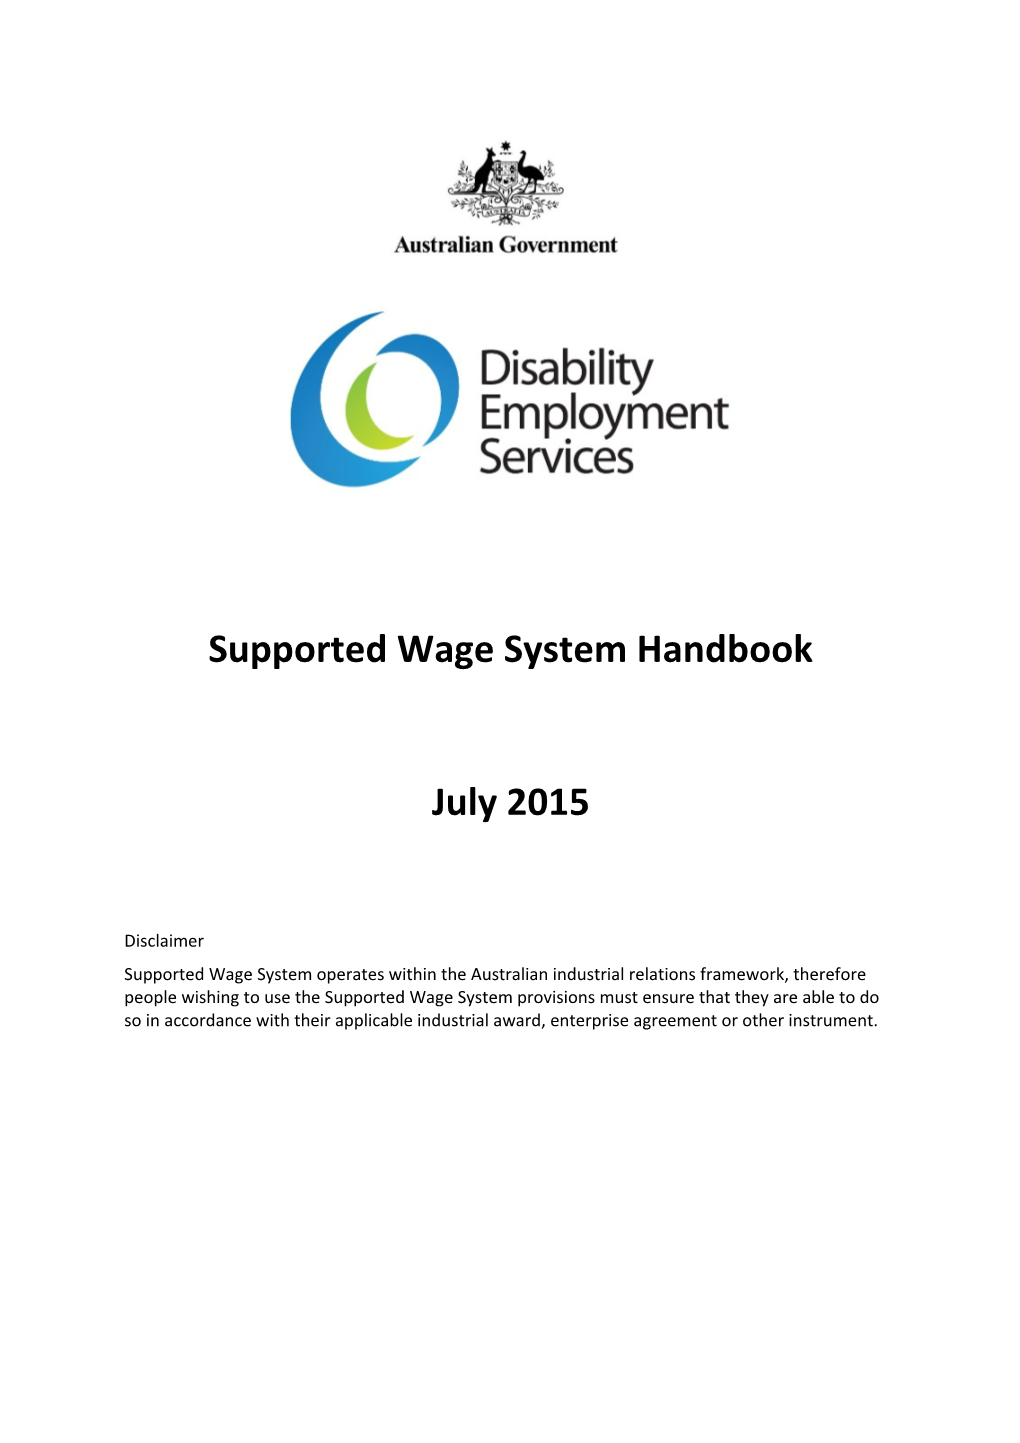 Supported Wage System Handbook July 2015